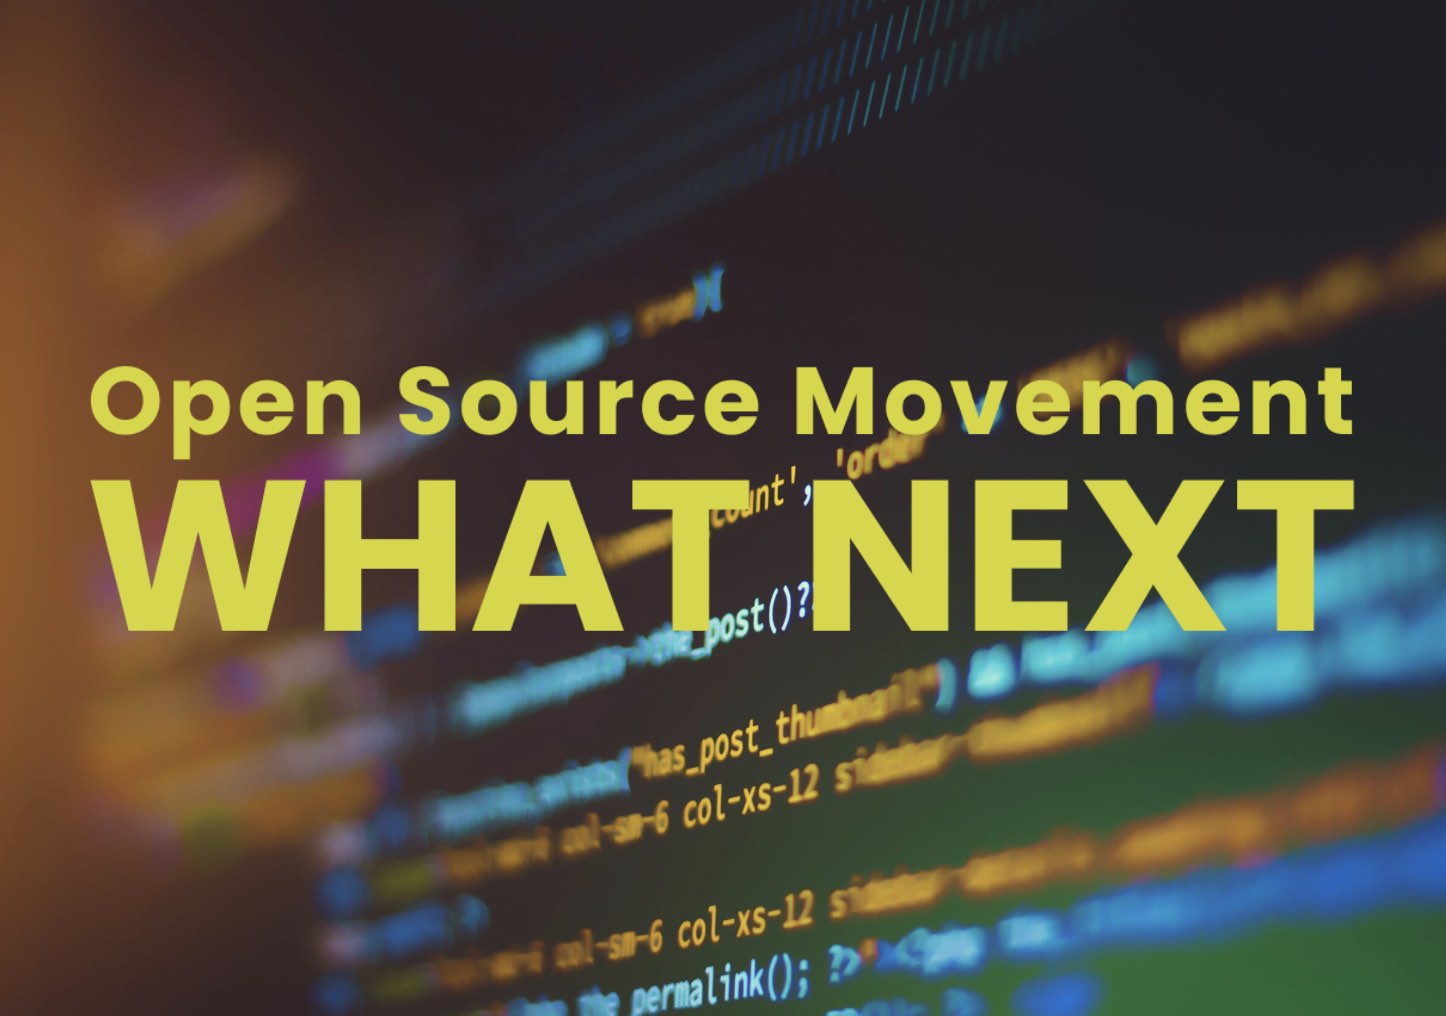 Open Source Movement What Next